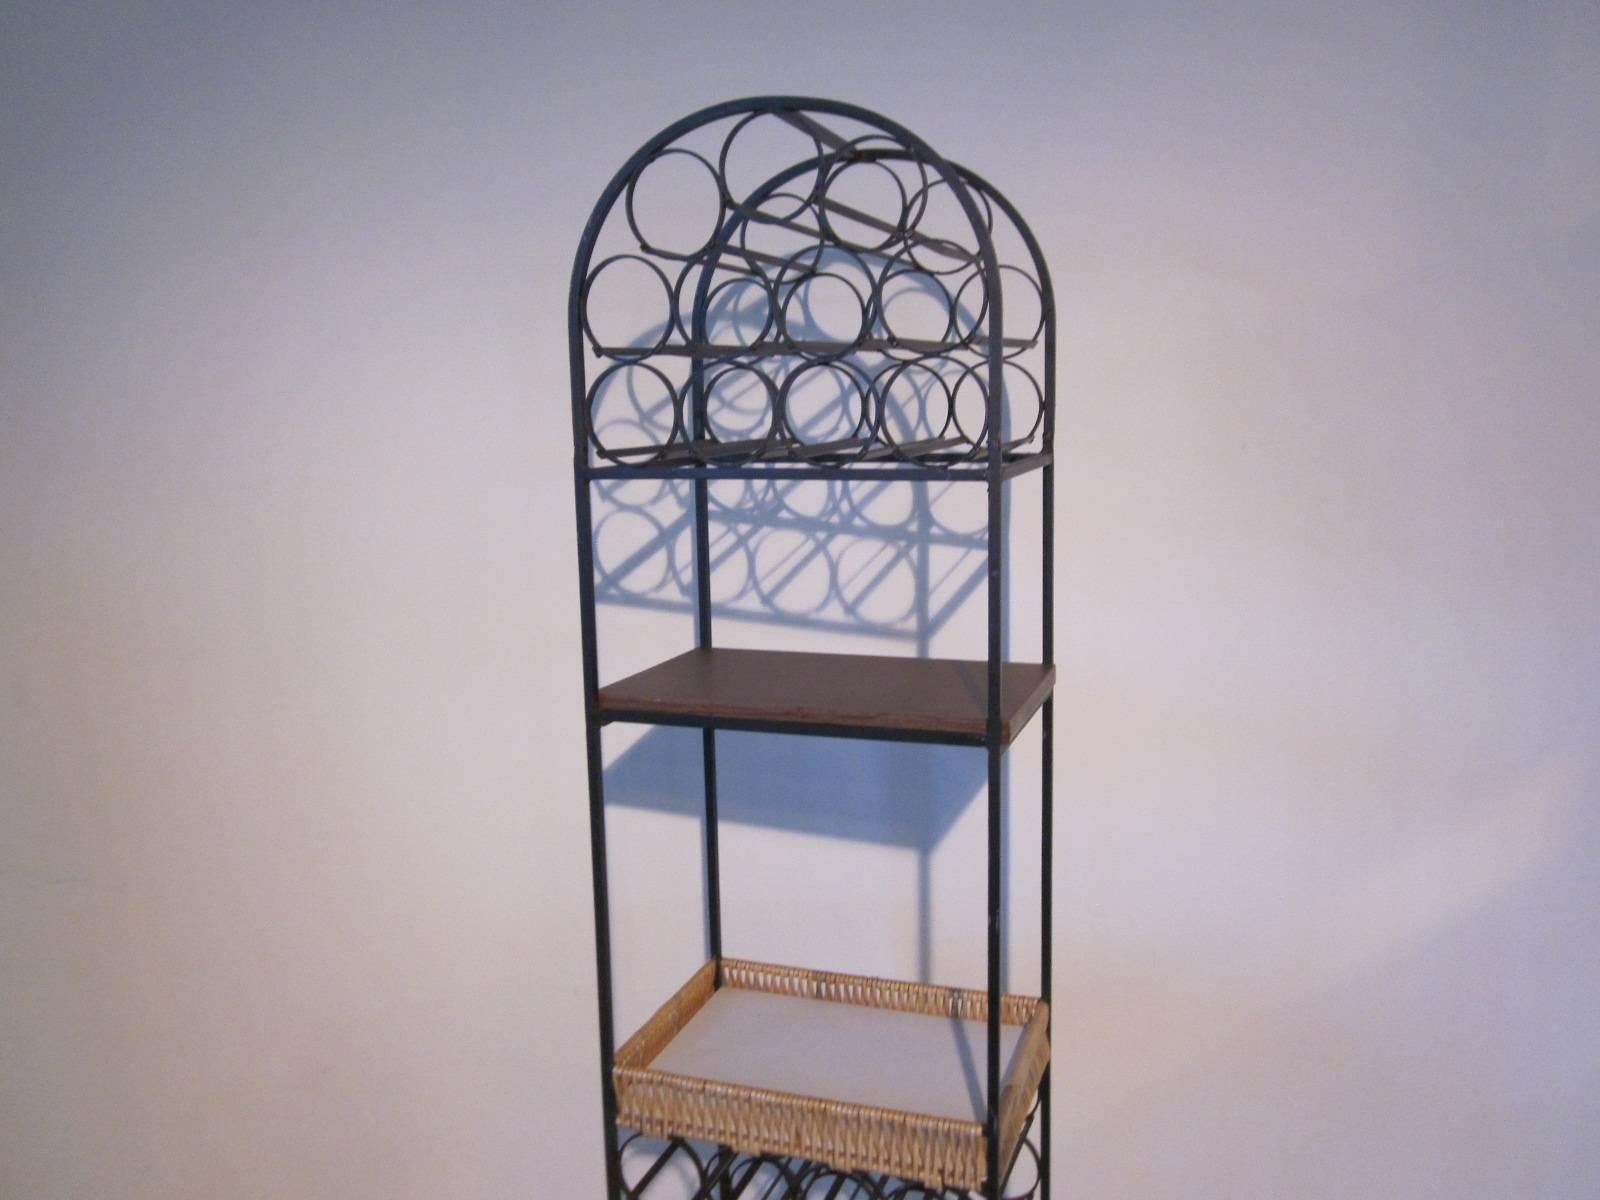 A black wrought iron wine rack which holds up to 39 bottles, has a woven shelve type basket for you bar tools or glasses and a upper laminated shelve for decanting, mixing and poring of your favorite beverage. Great for that tight spot in the den,